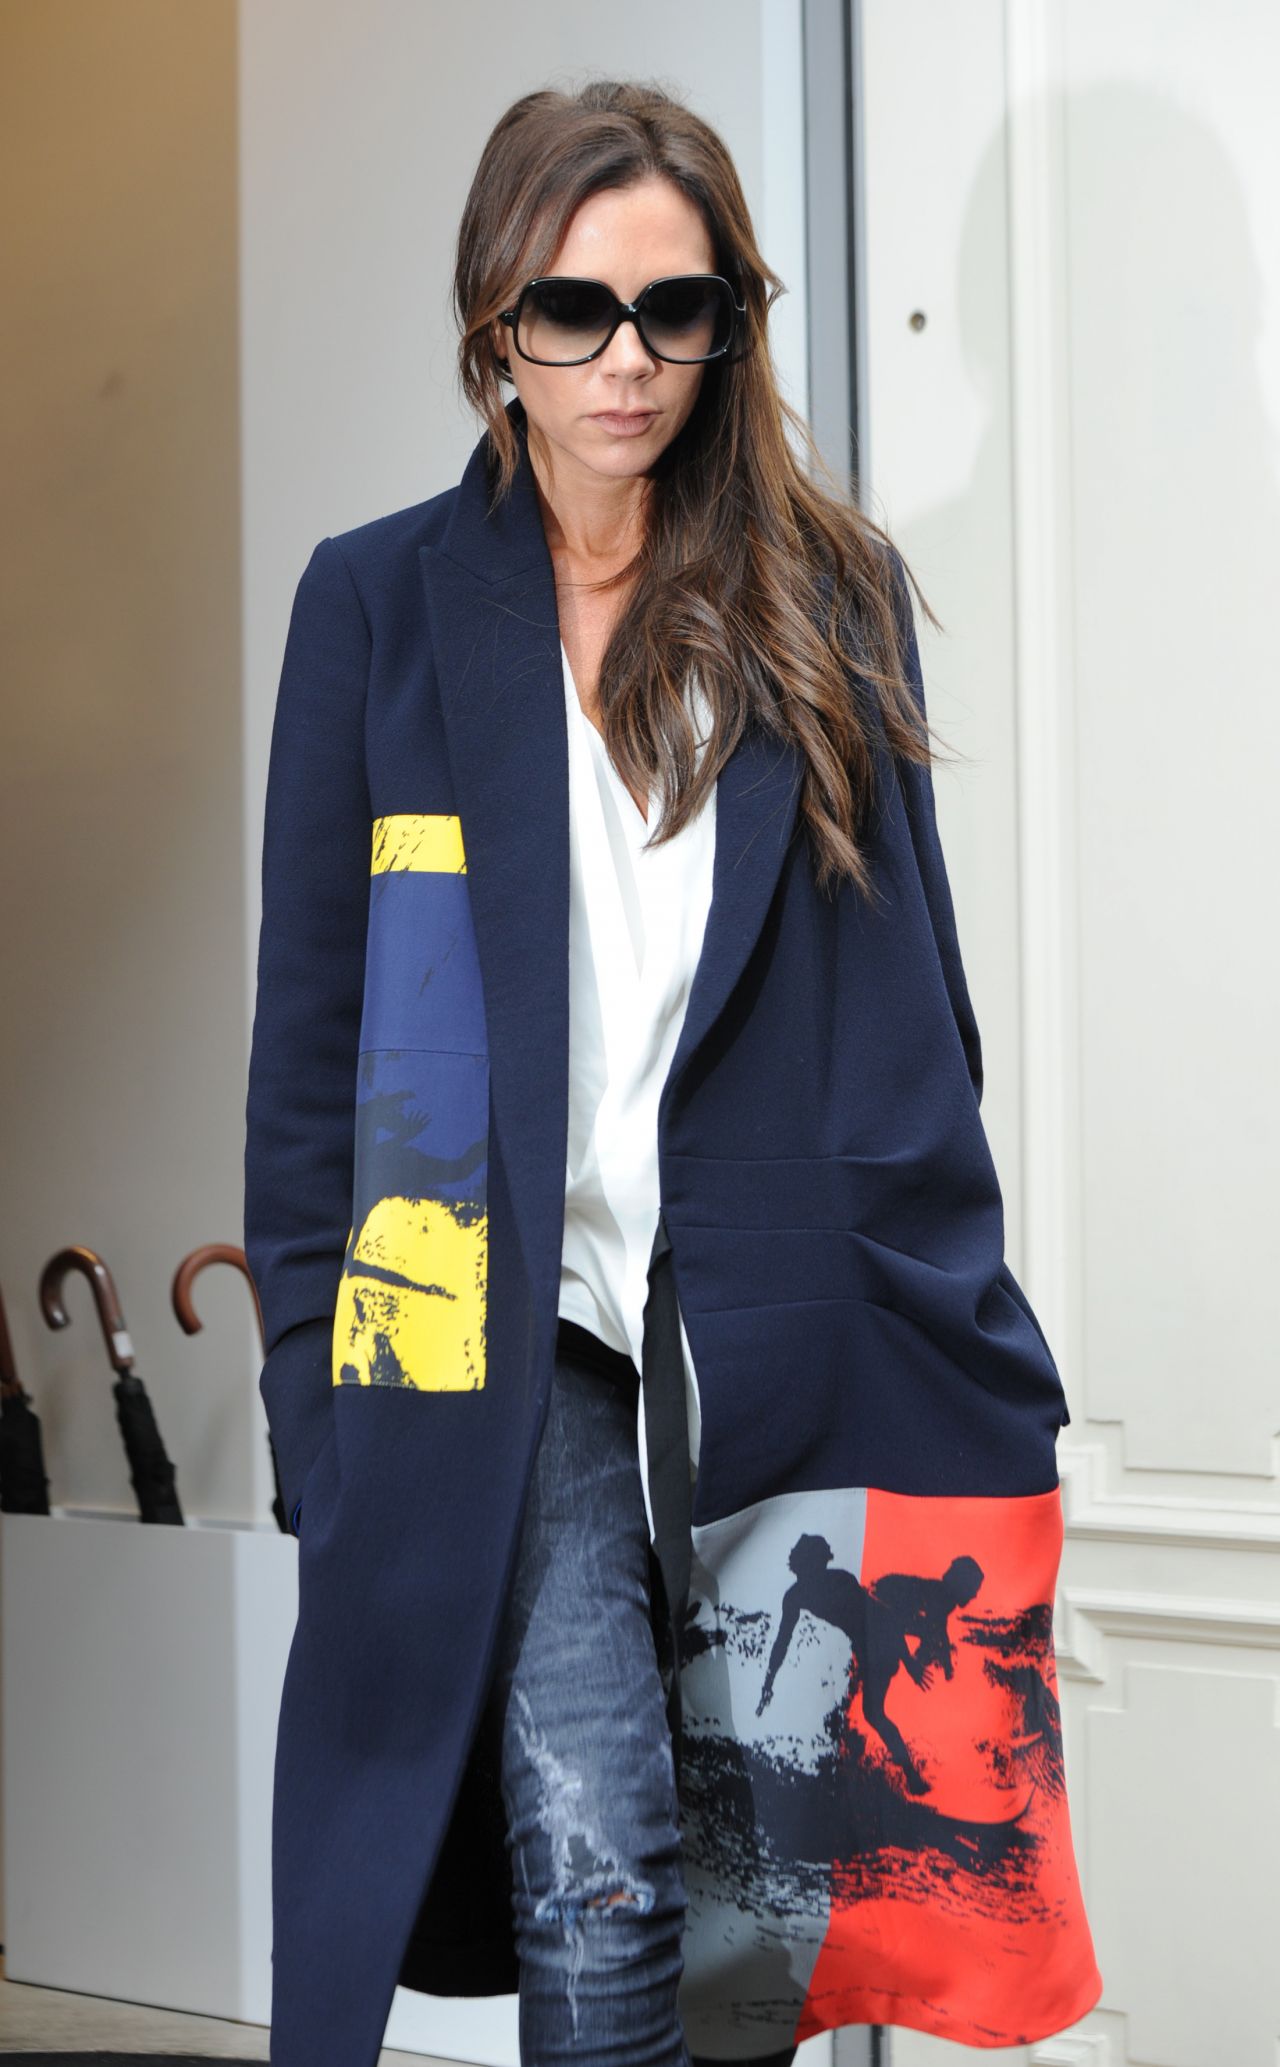 Victoria Beckham Style - Out in London, September 2015